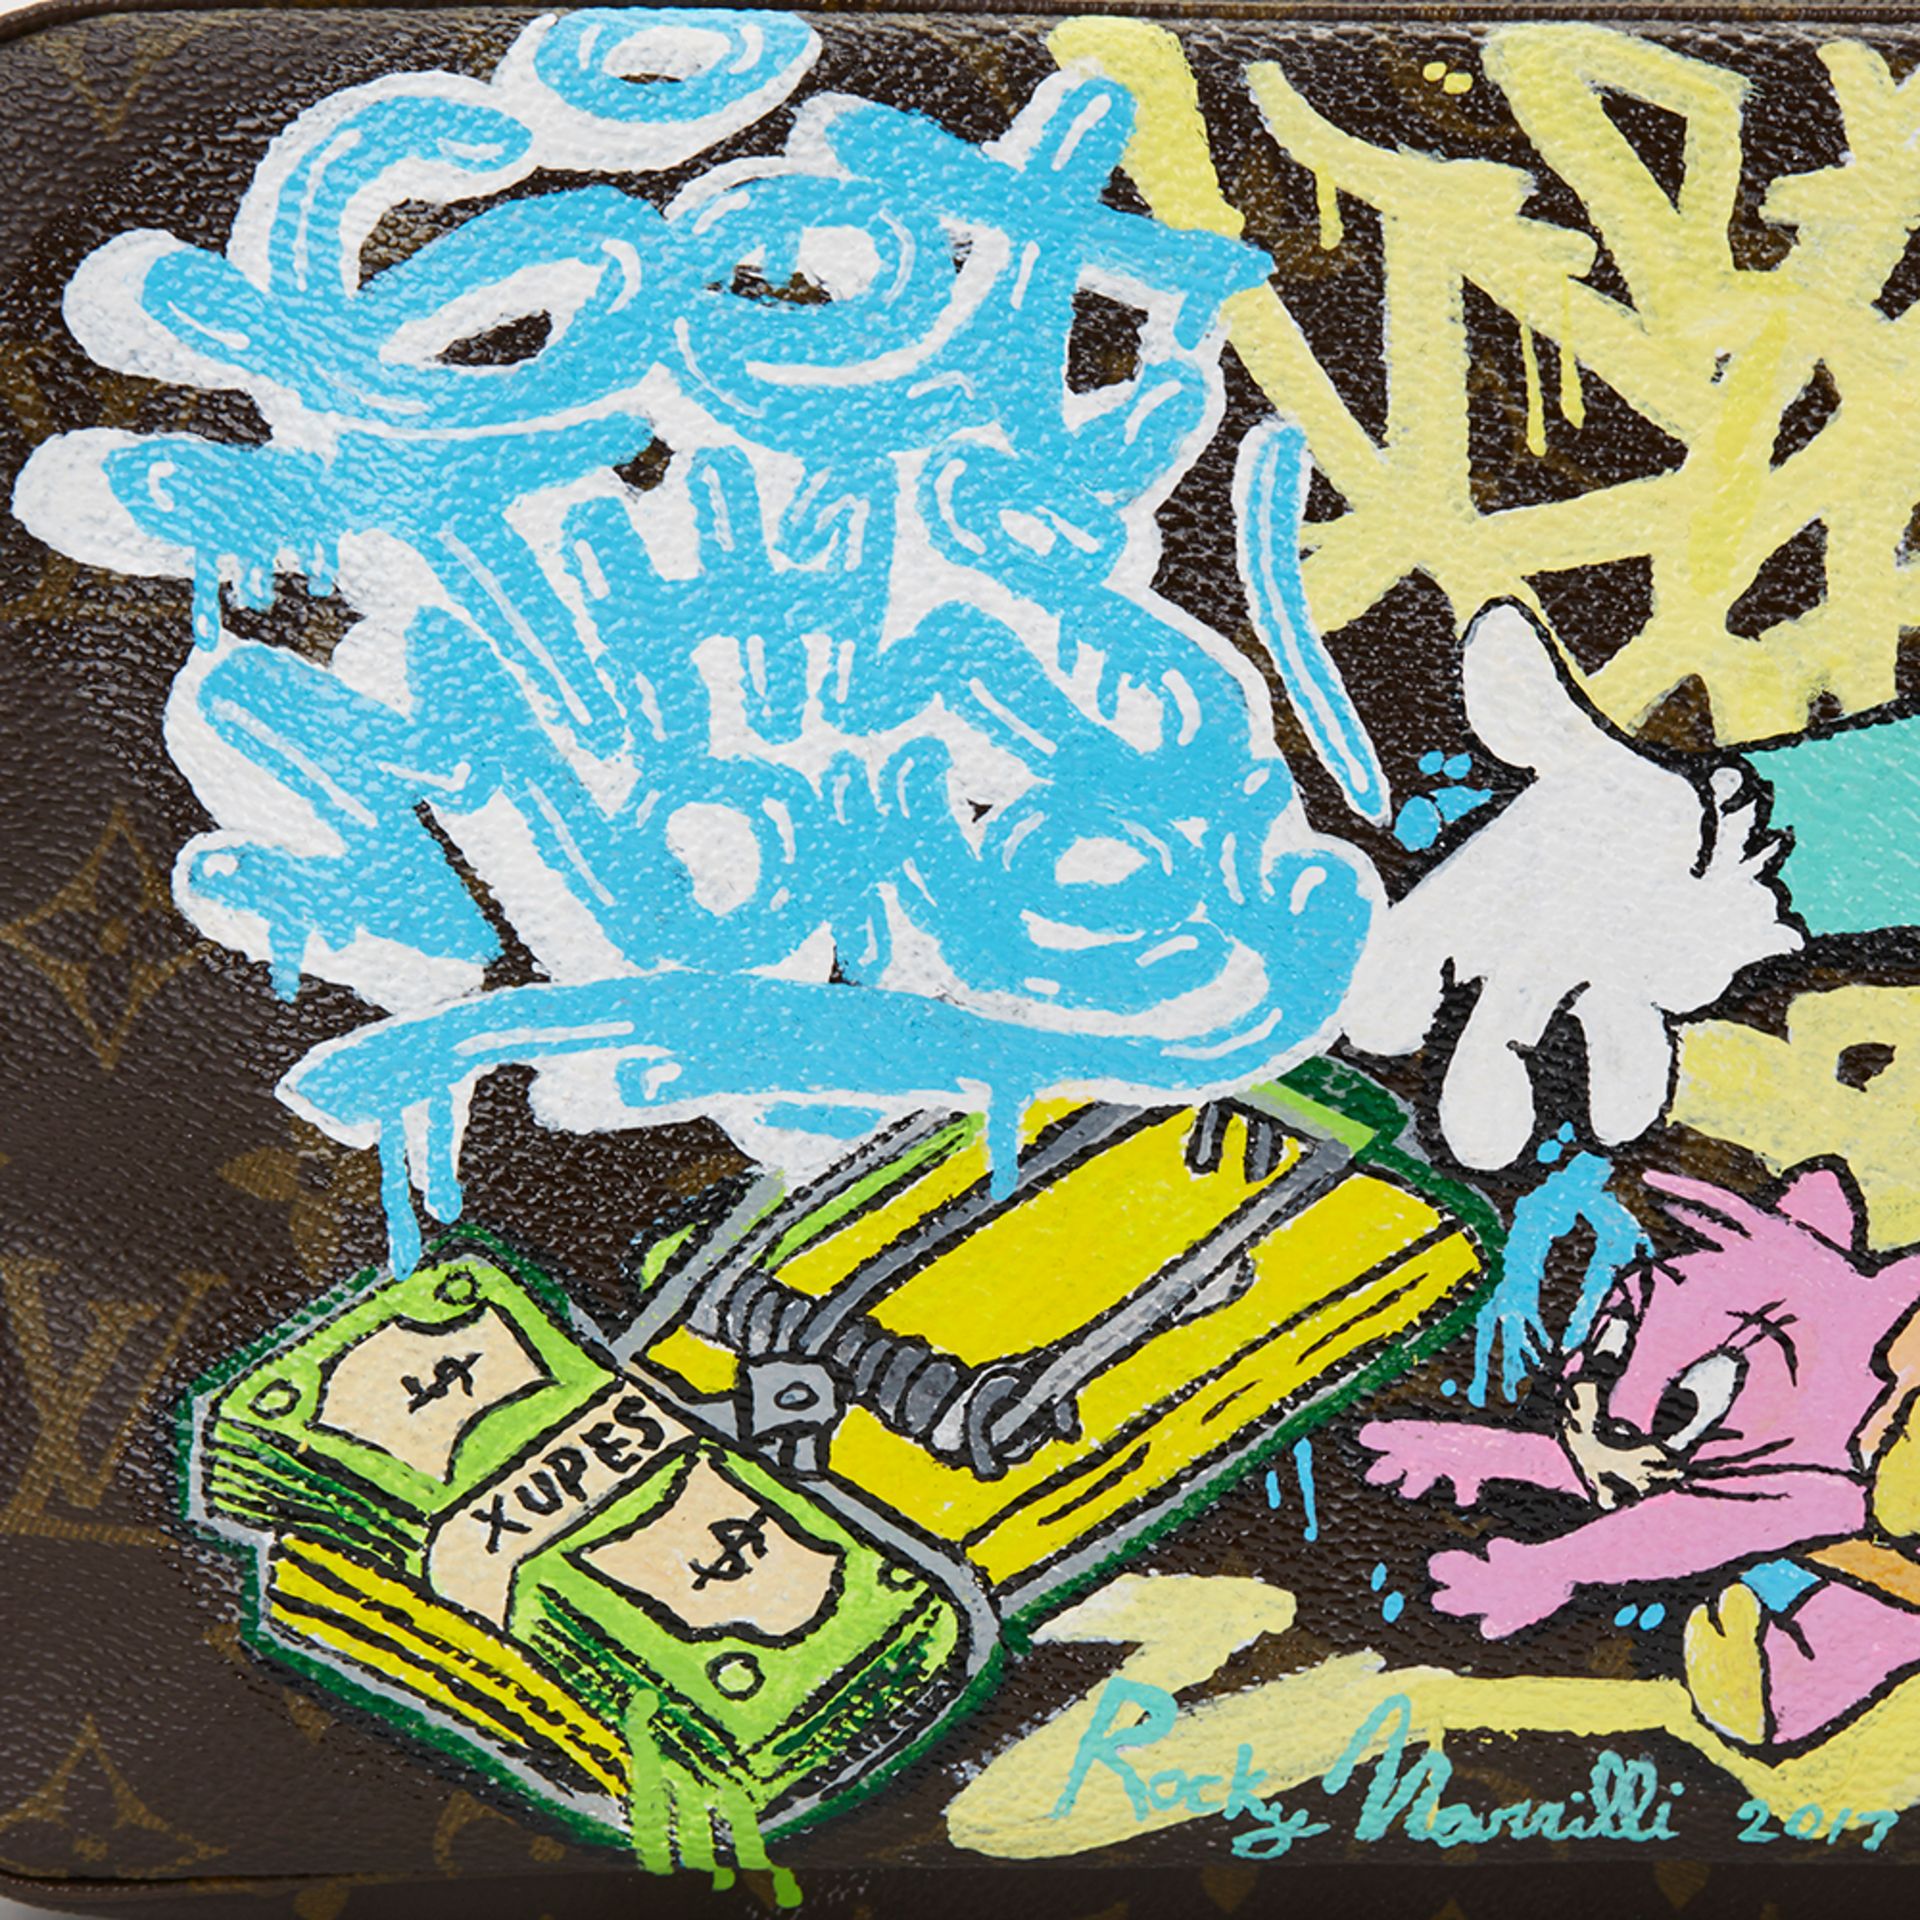 Louis Vuitton Hand-painted 'Get This Money' X Year Zero London Toiletry Pouch - Image 6 of 9